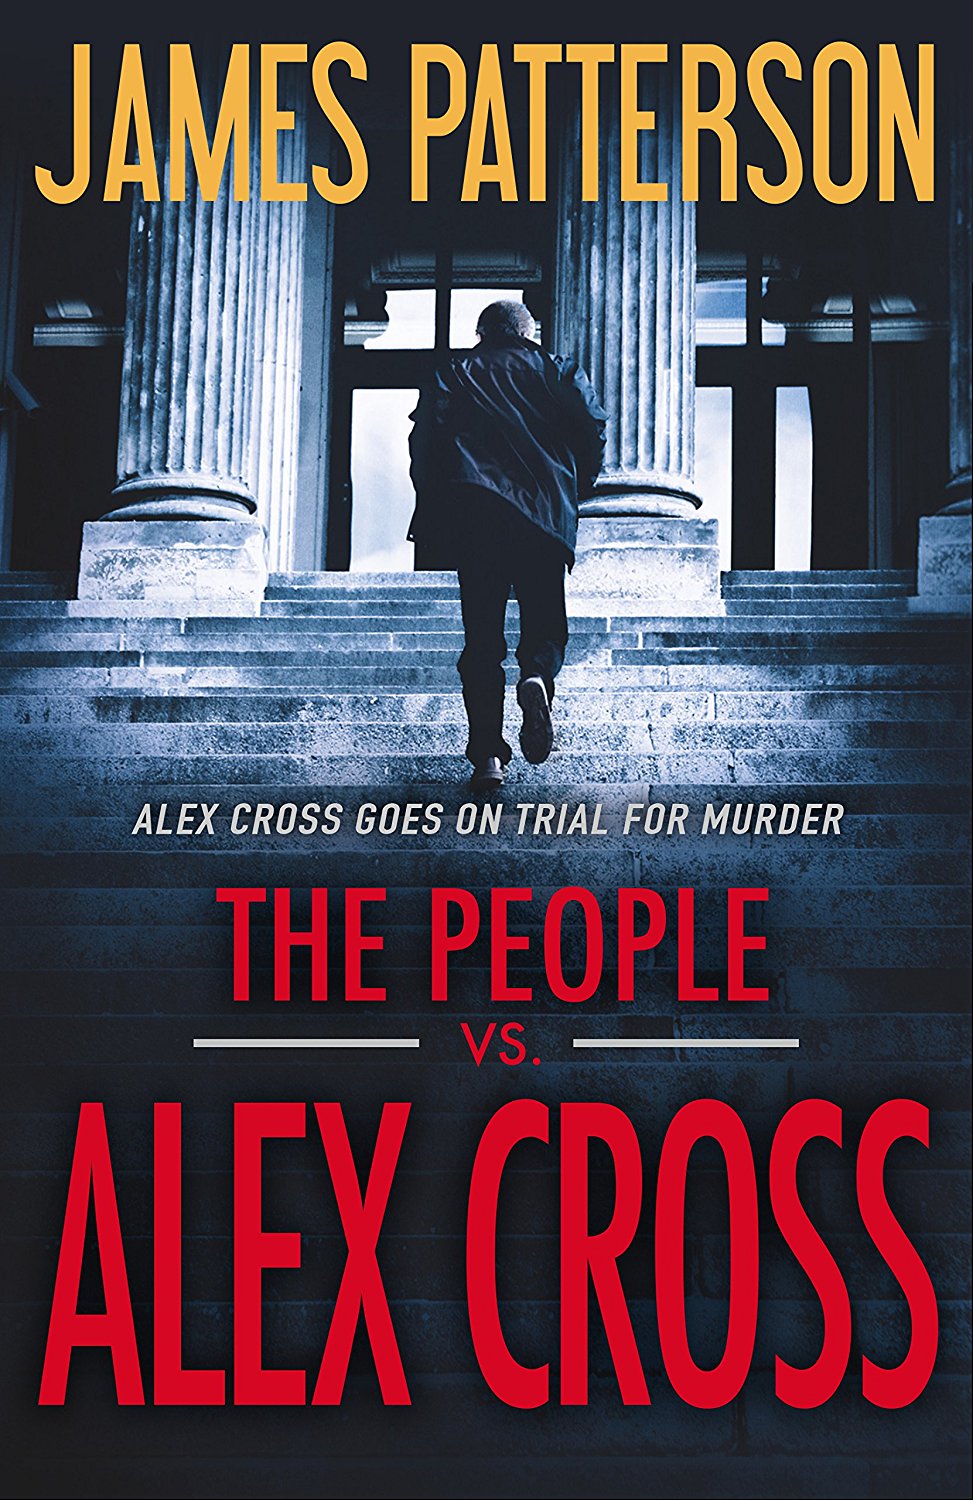 Friday Reads: The People vs. Alex Cross by James Patterson